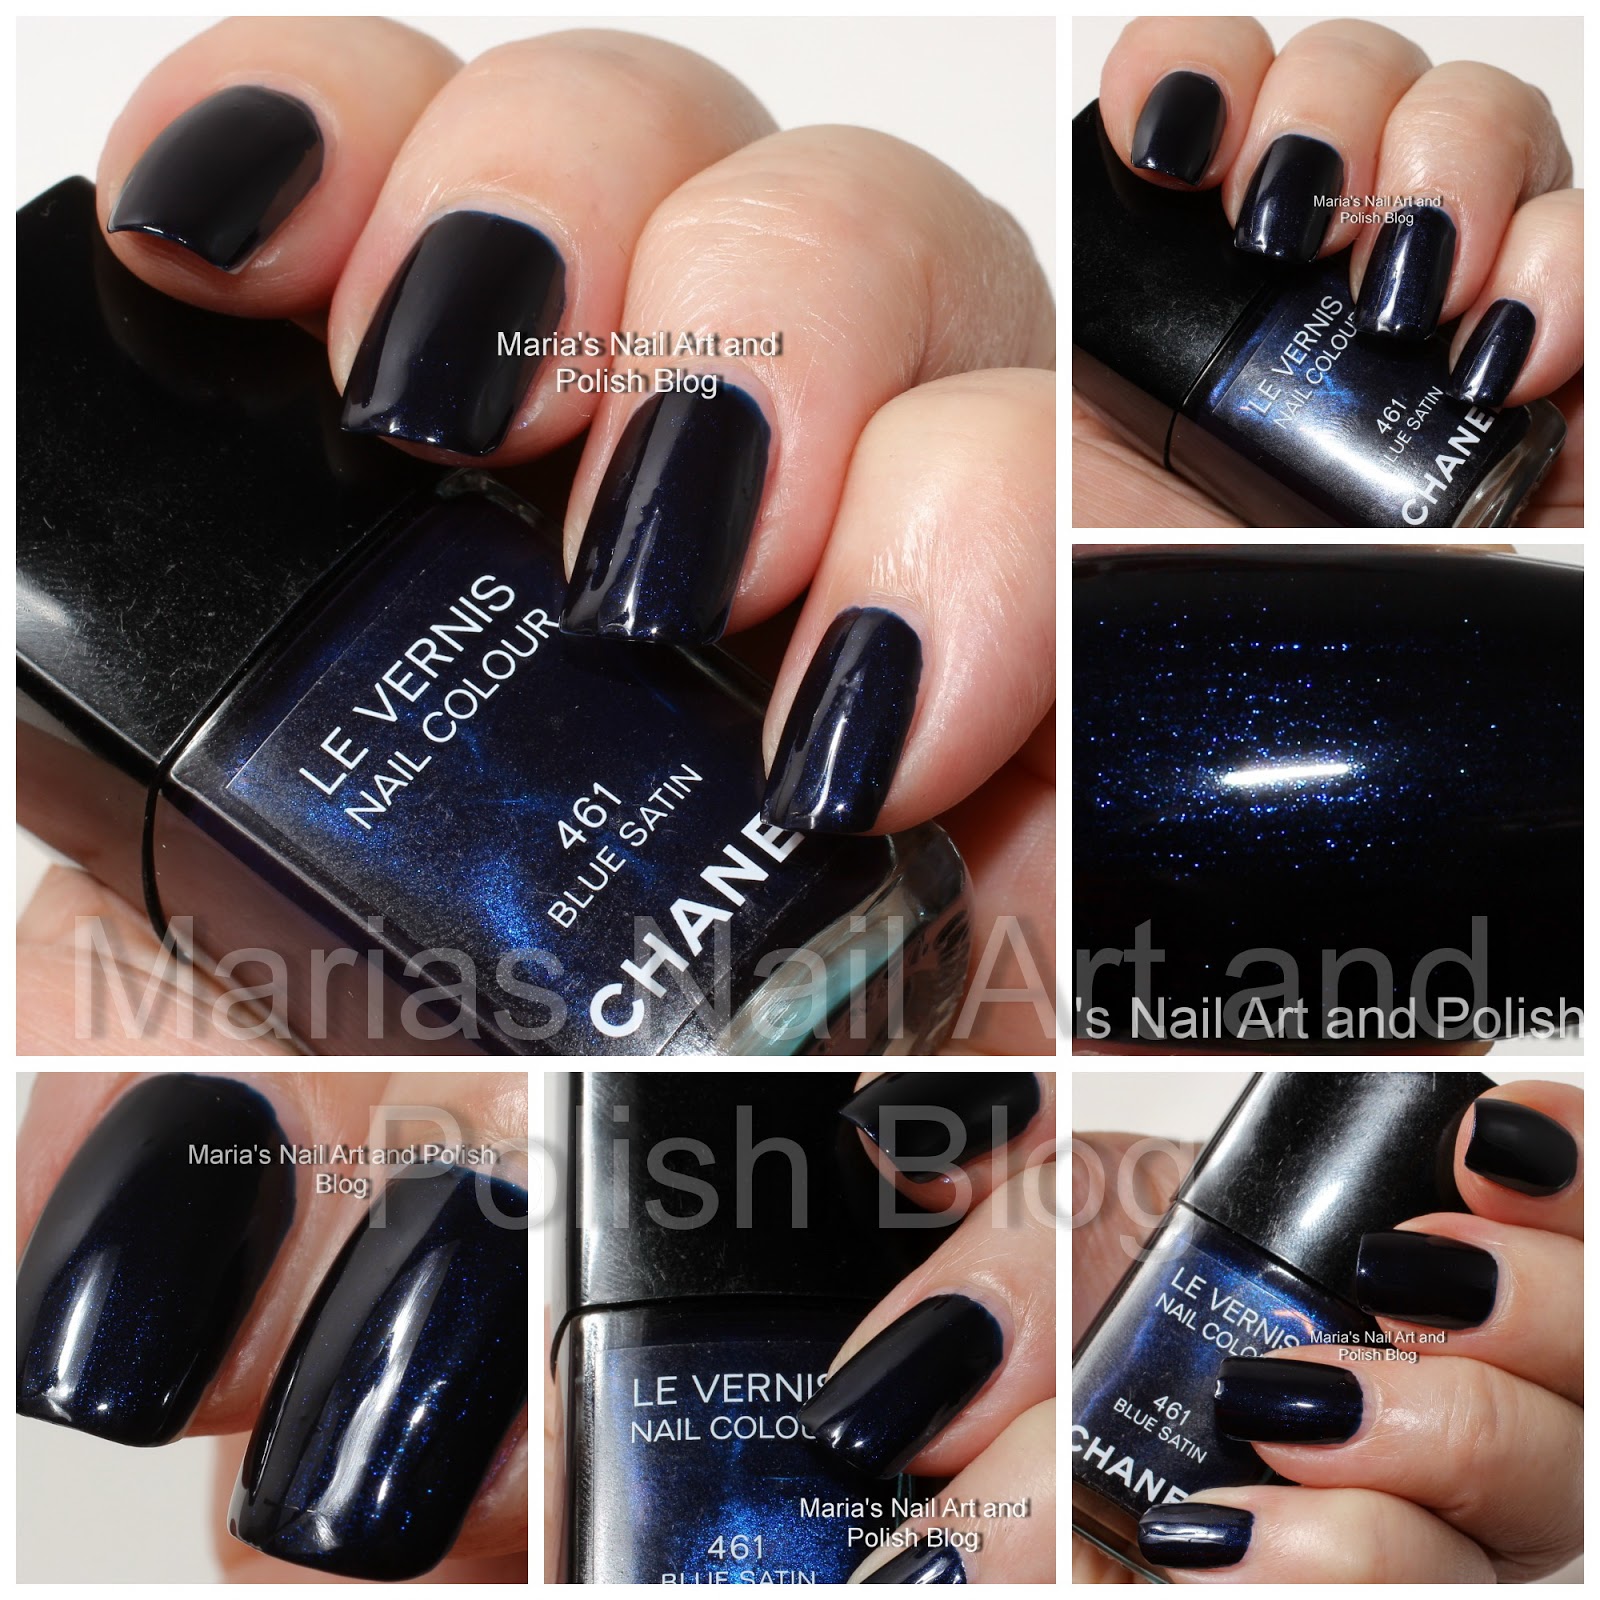 Marias Nail Art and Polish Chanel Blue 461, Aurora Blues Accent coll. swatches Collaboration Saturday